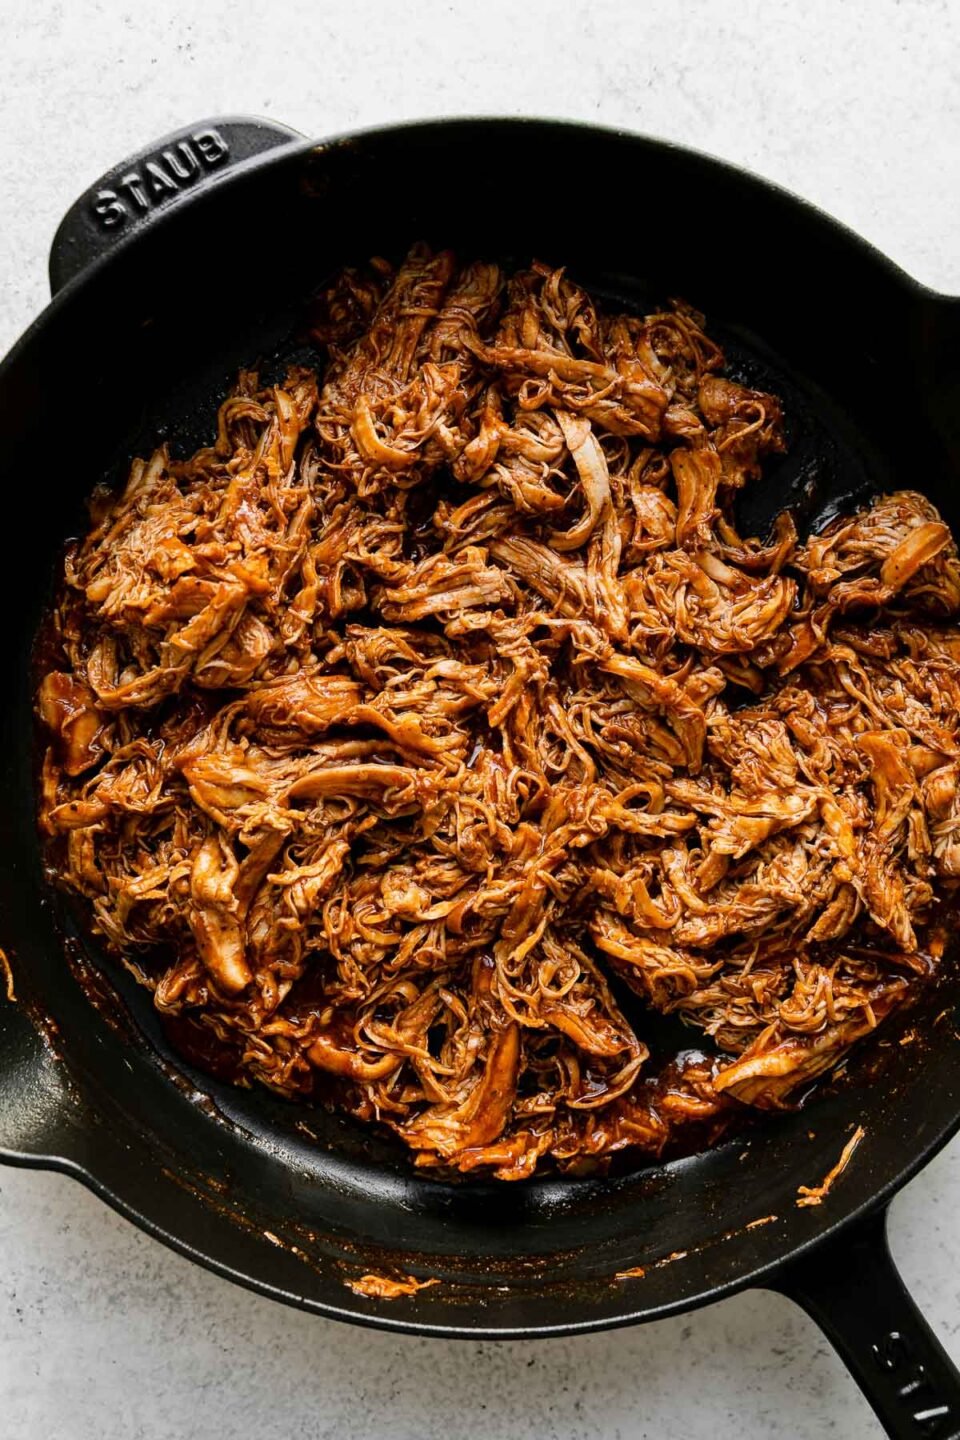 Shredded chicken mixed with buffalo sauce fills a black Staub cast iron skillet. The skillet sits atop a creamy white textured surface.